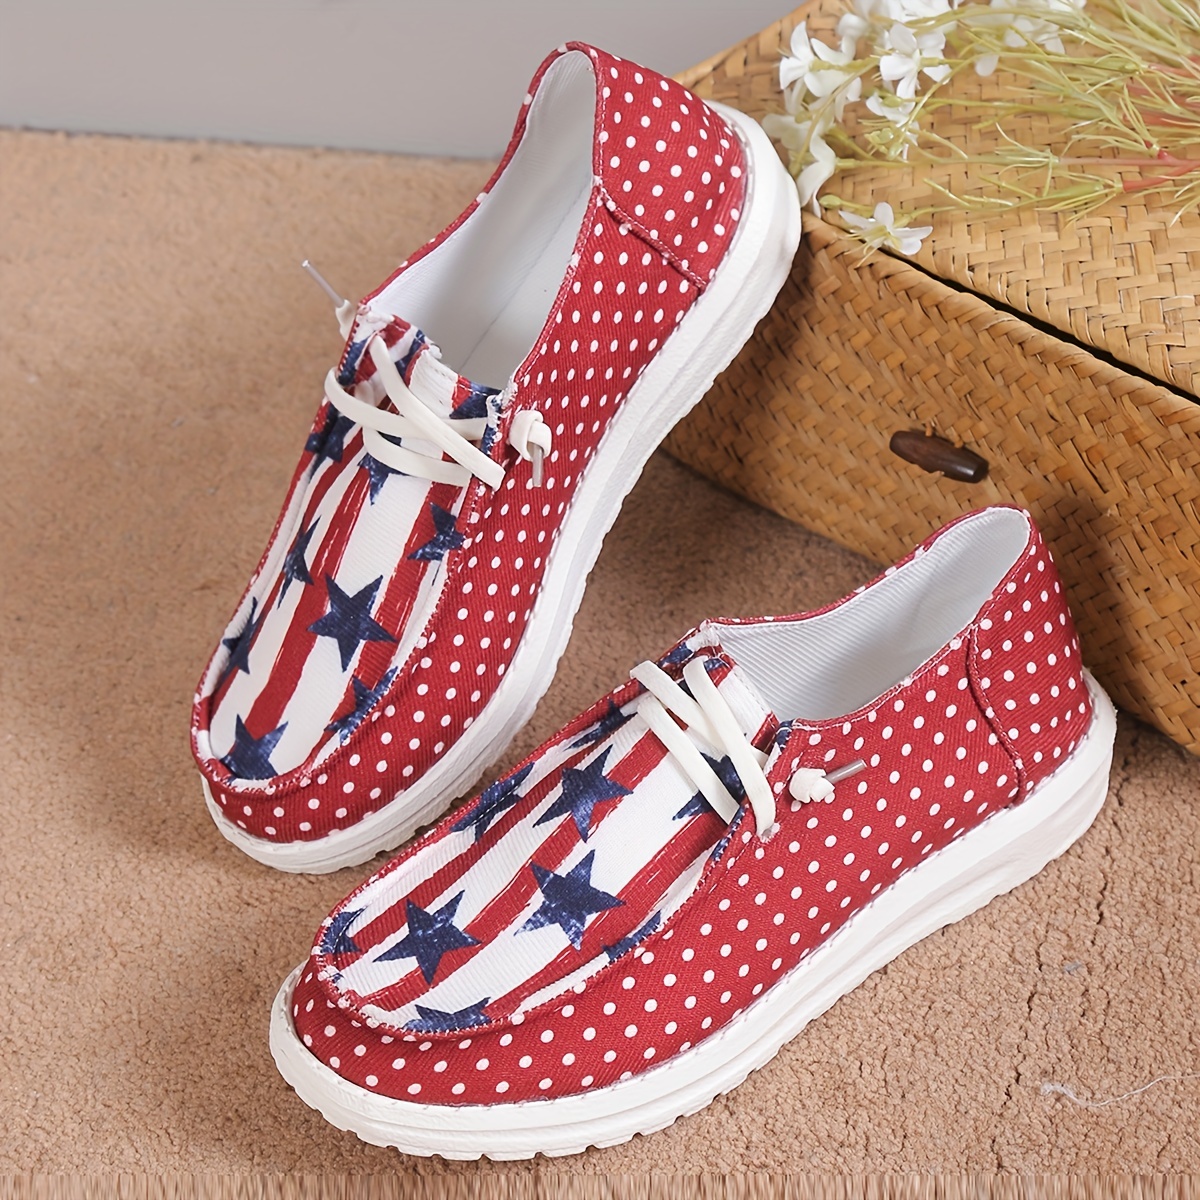 Women's Flat Canvas Shoes, Star Patter & Polka Dot Low Top Sneakers, Casual  Walking Shoes